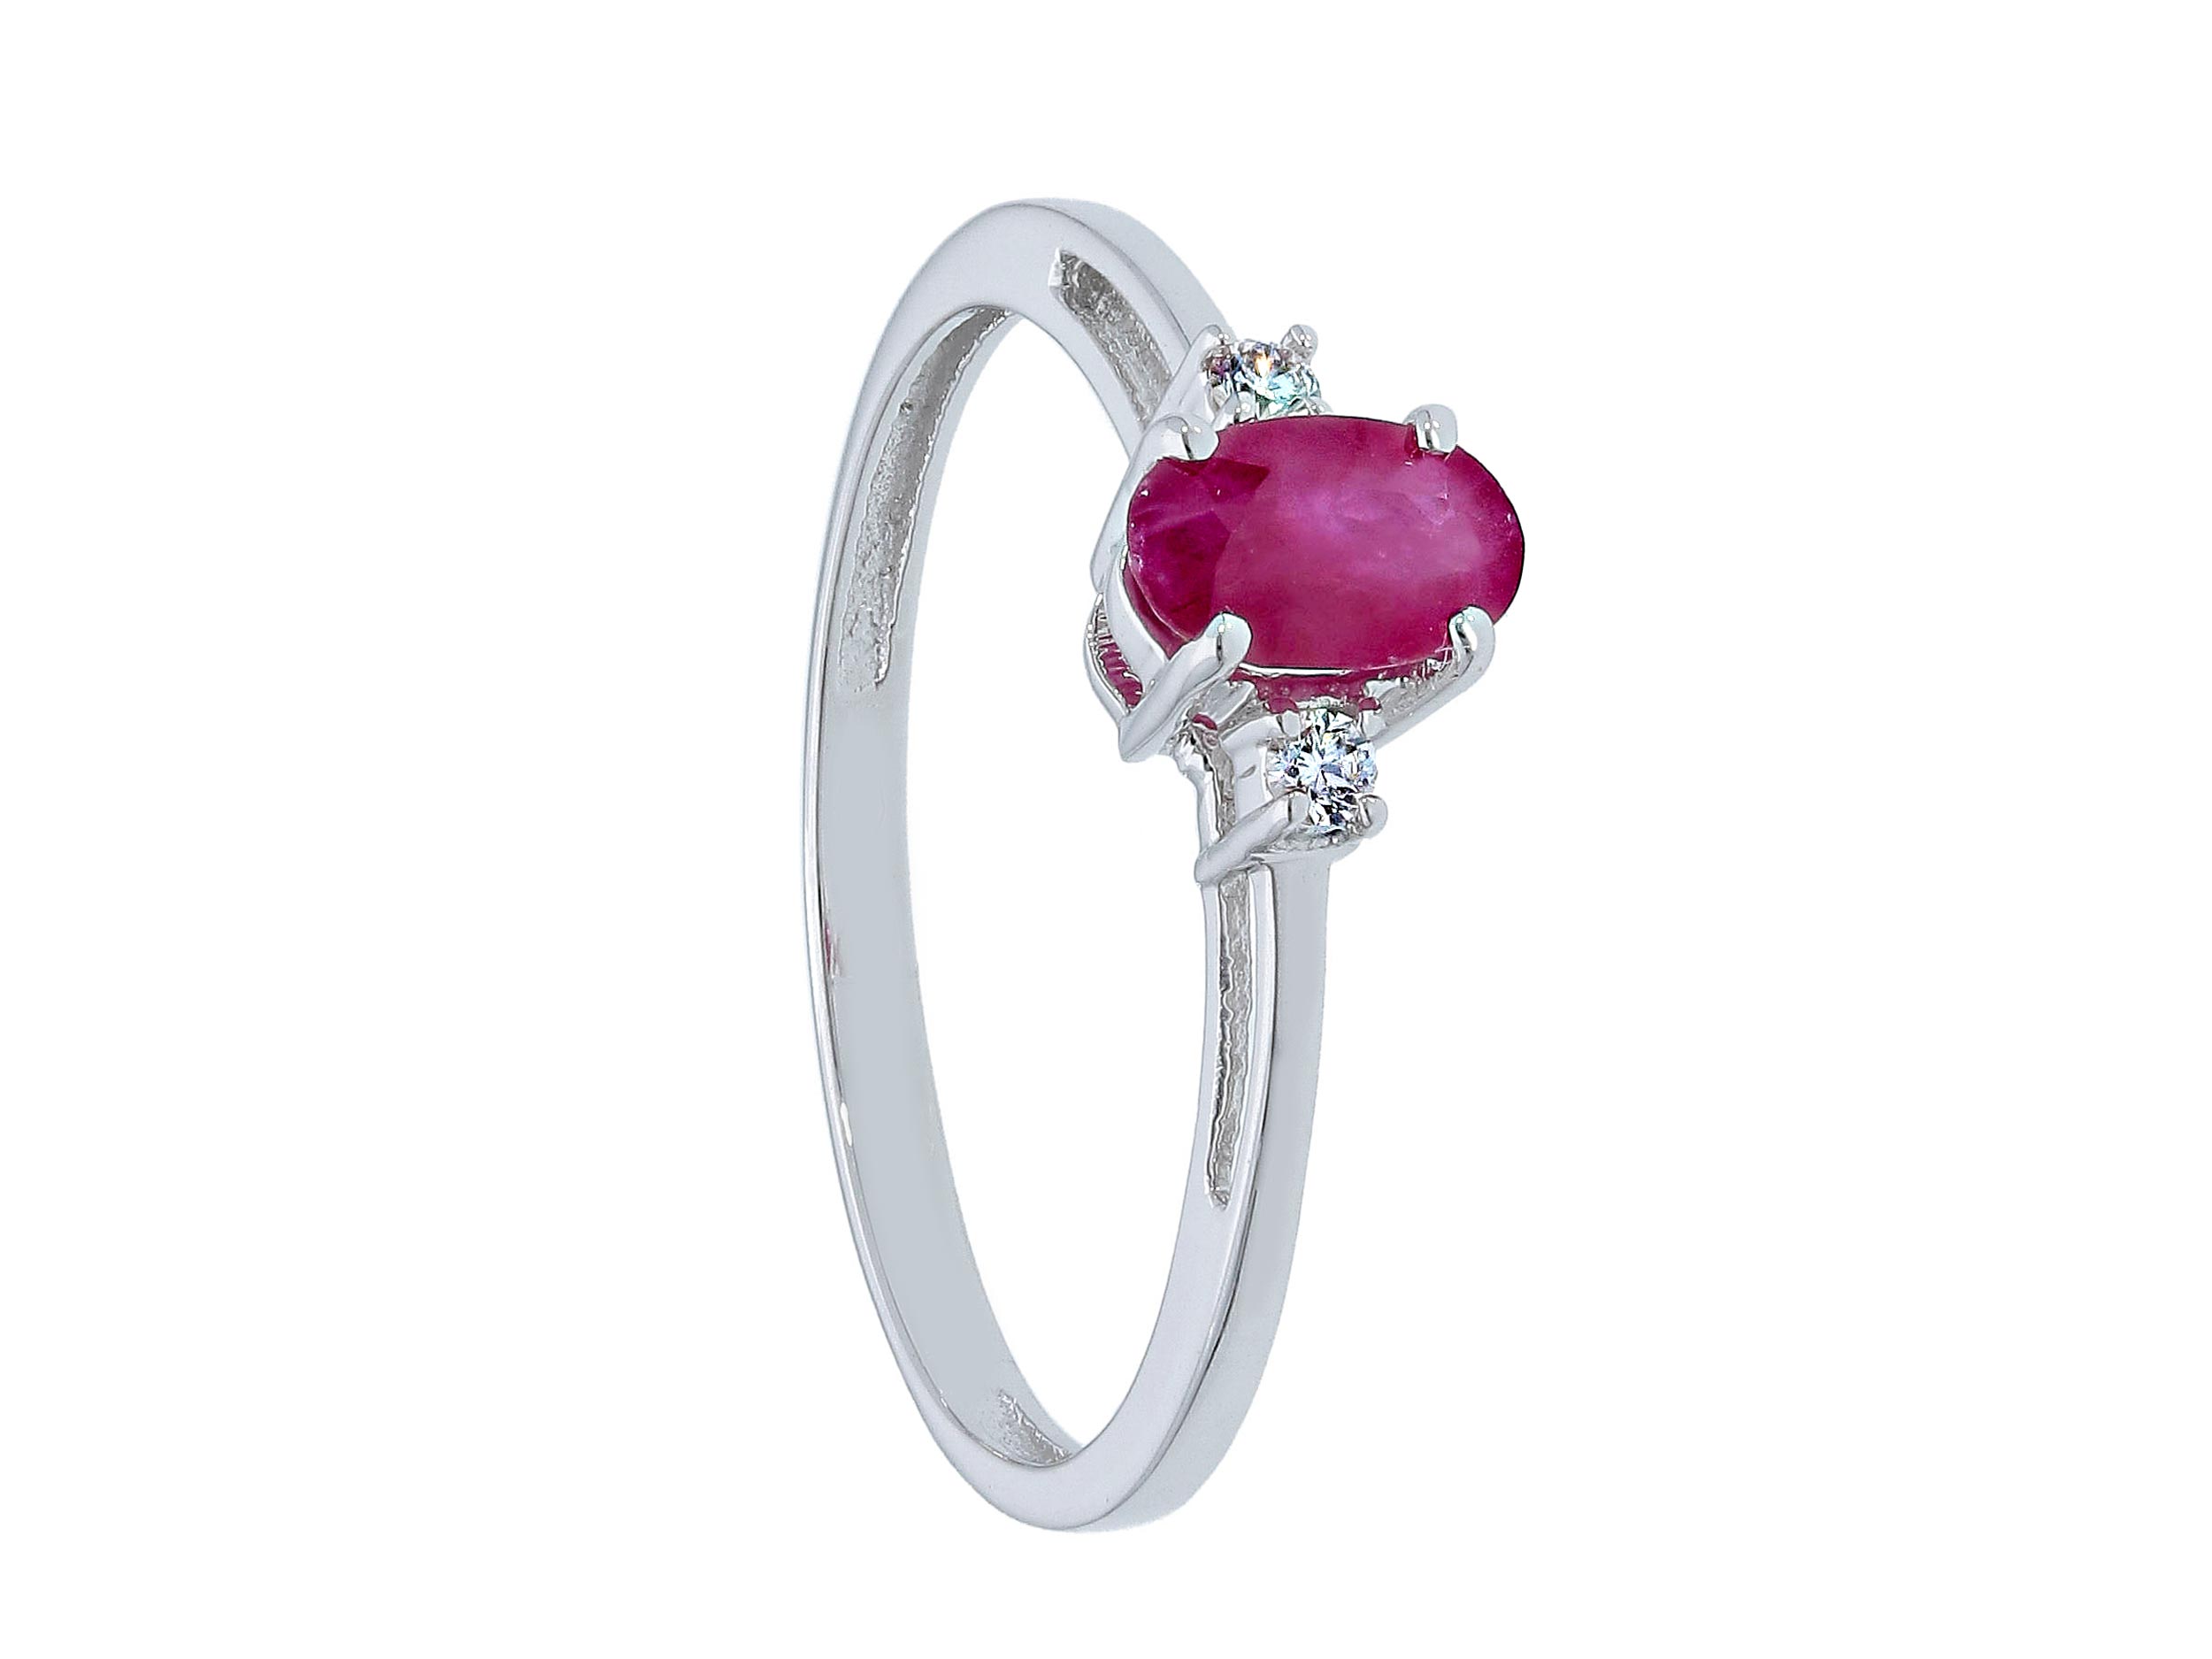 GOLD RING - RUBIES AND DIAMONDS ITEM CODE 121799